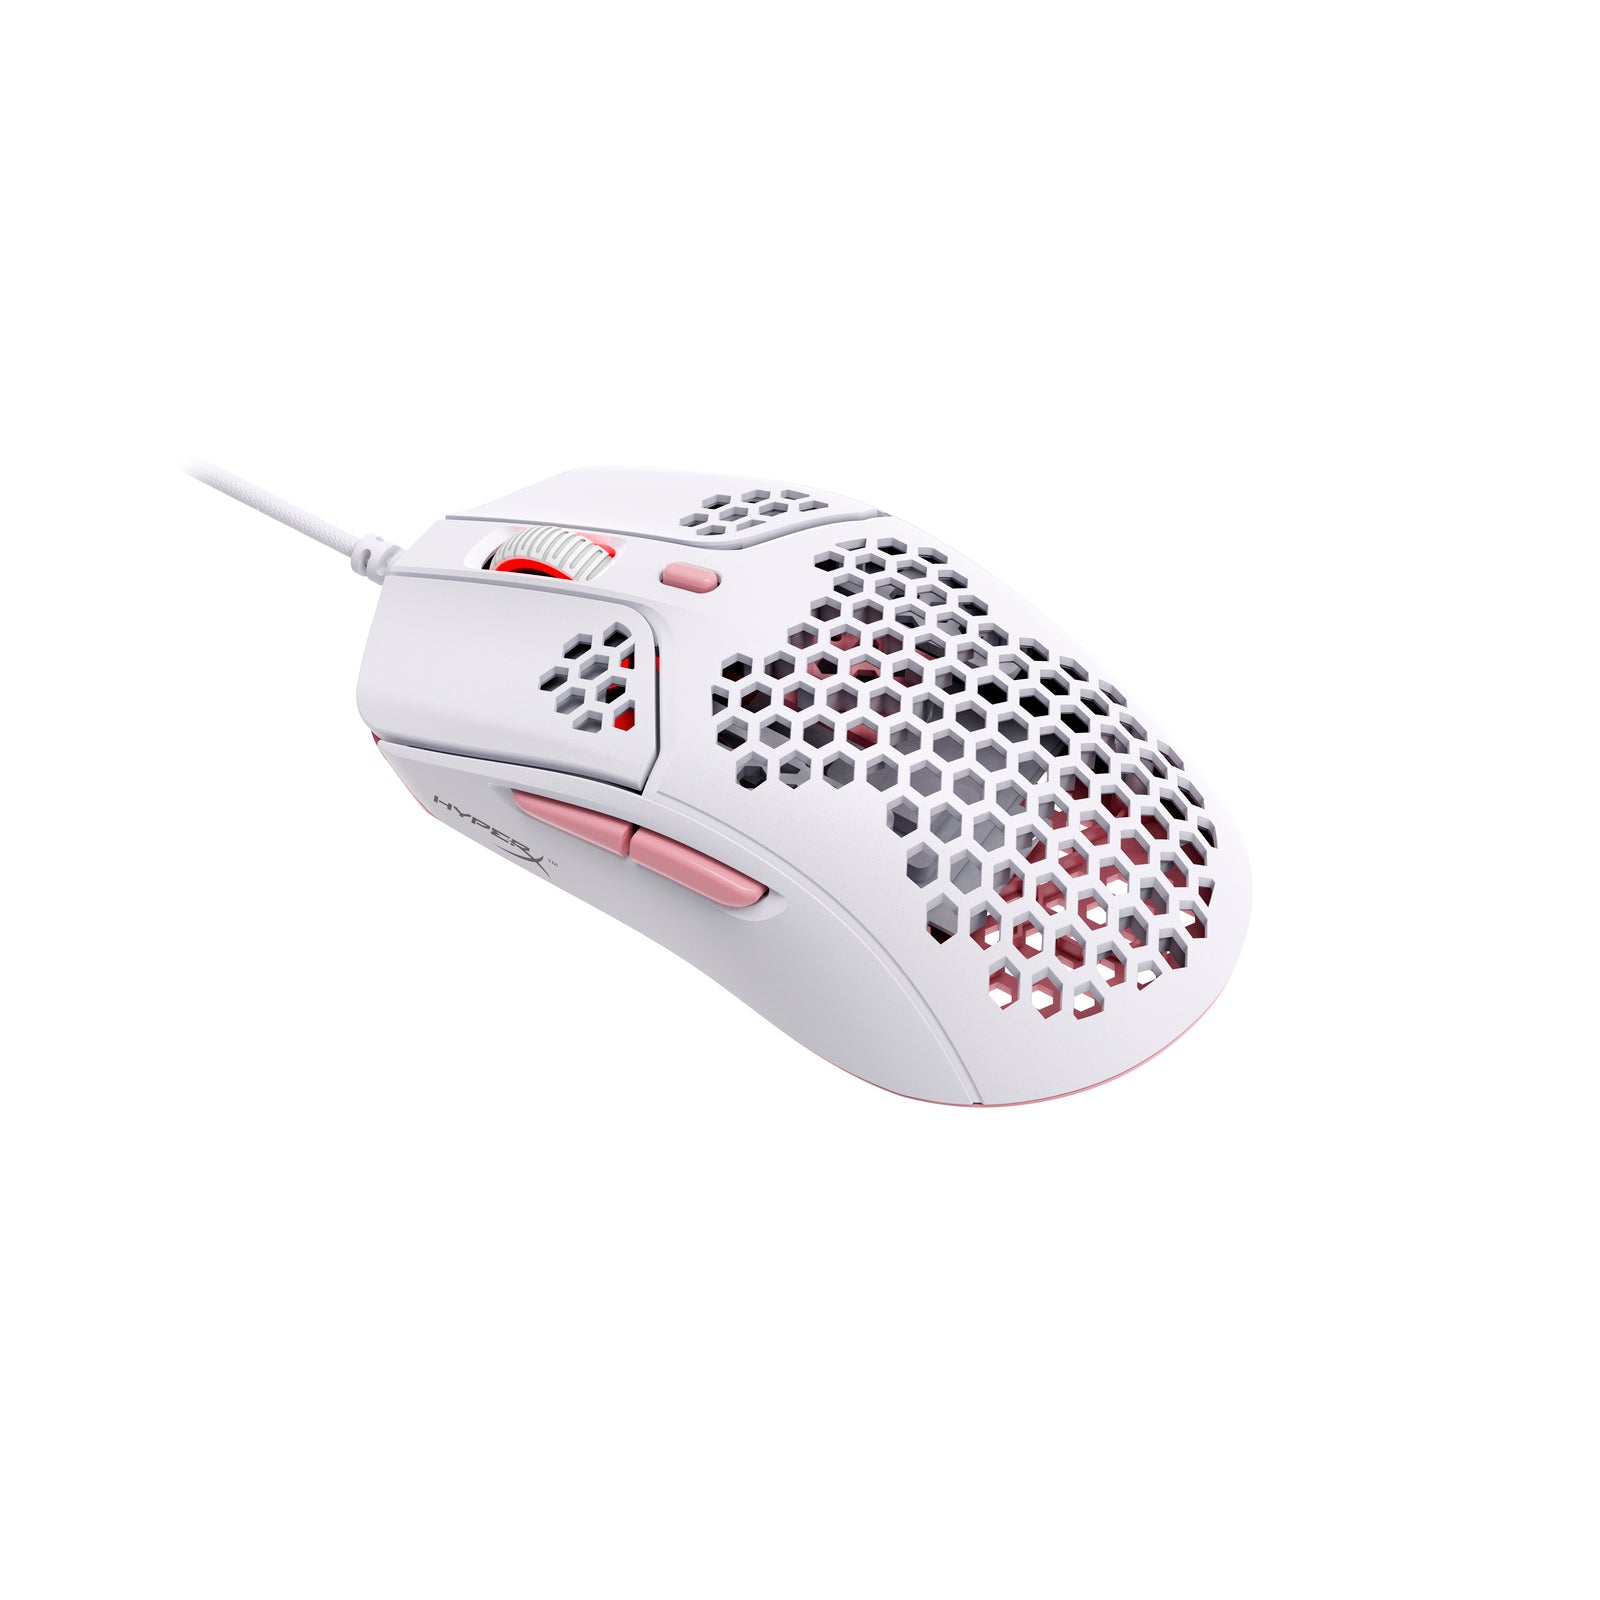 HyperX's all-new TimTheTatMan Edition Pulsefire Haste Gaming Mouse